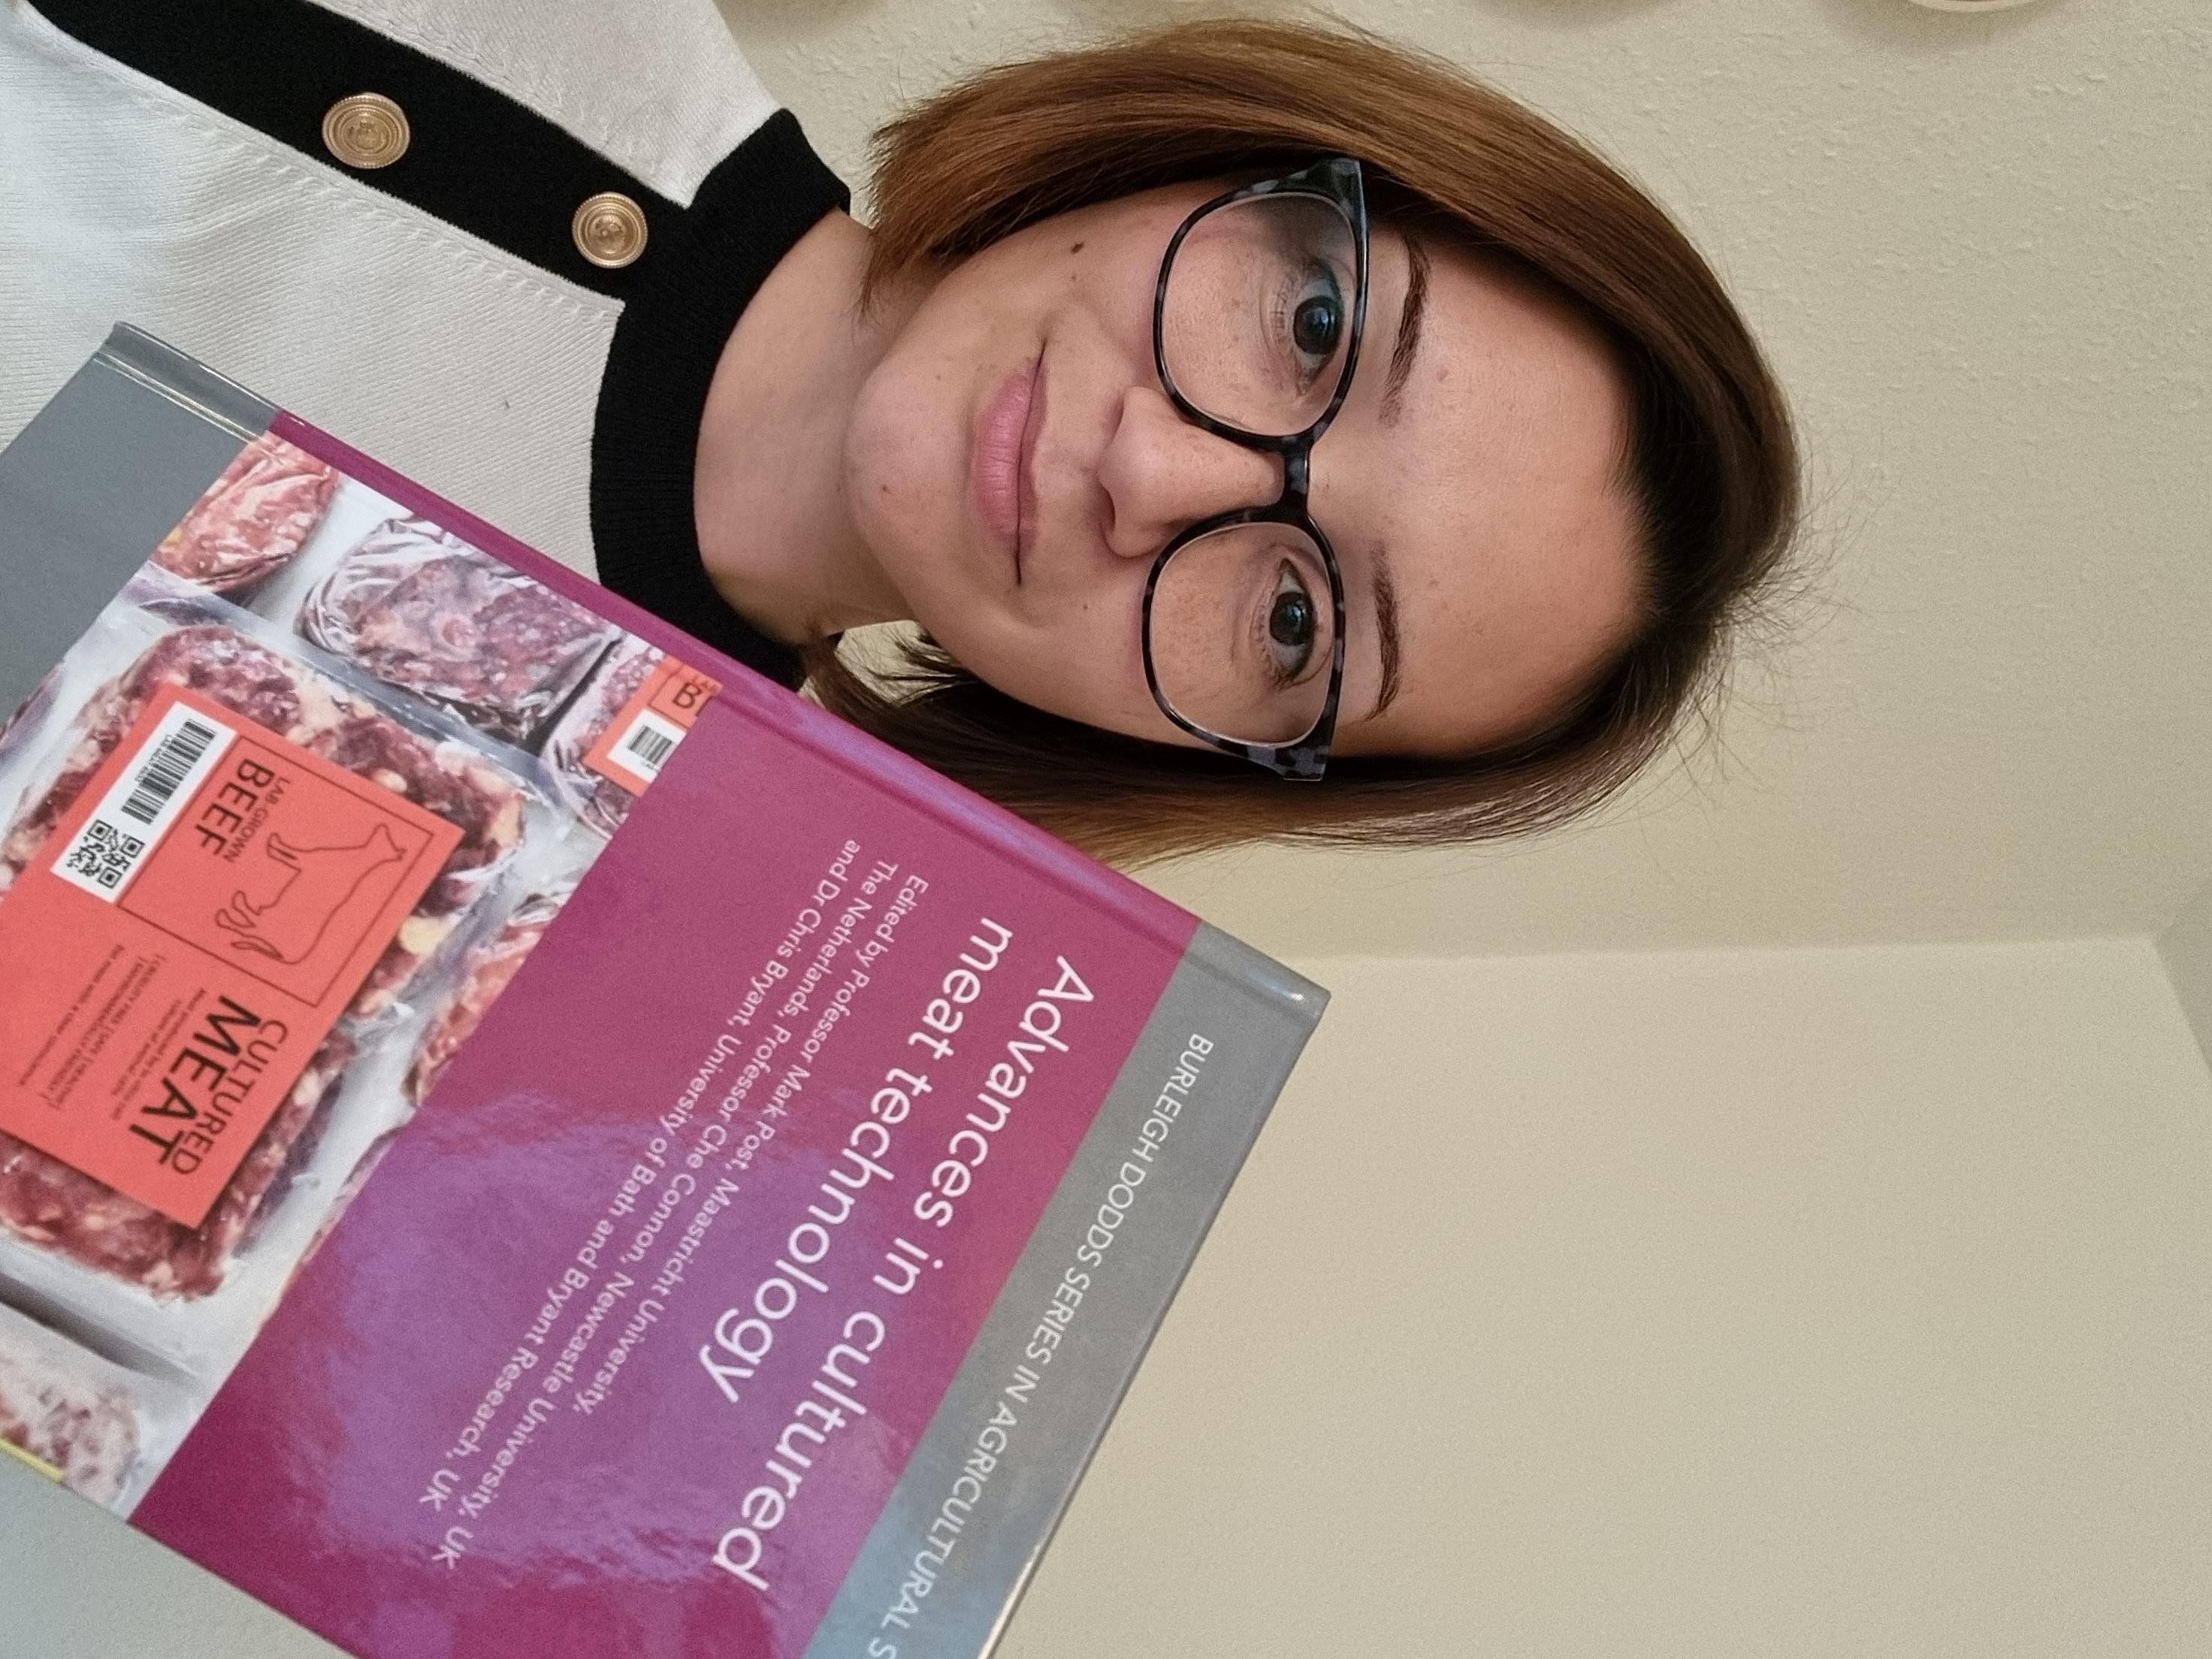 Petra Hanga smiling while holding a copy of the Advances in cultured meat technology book